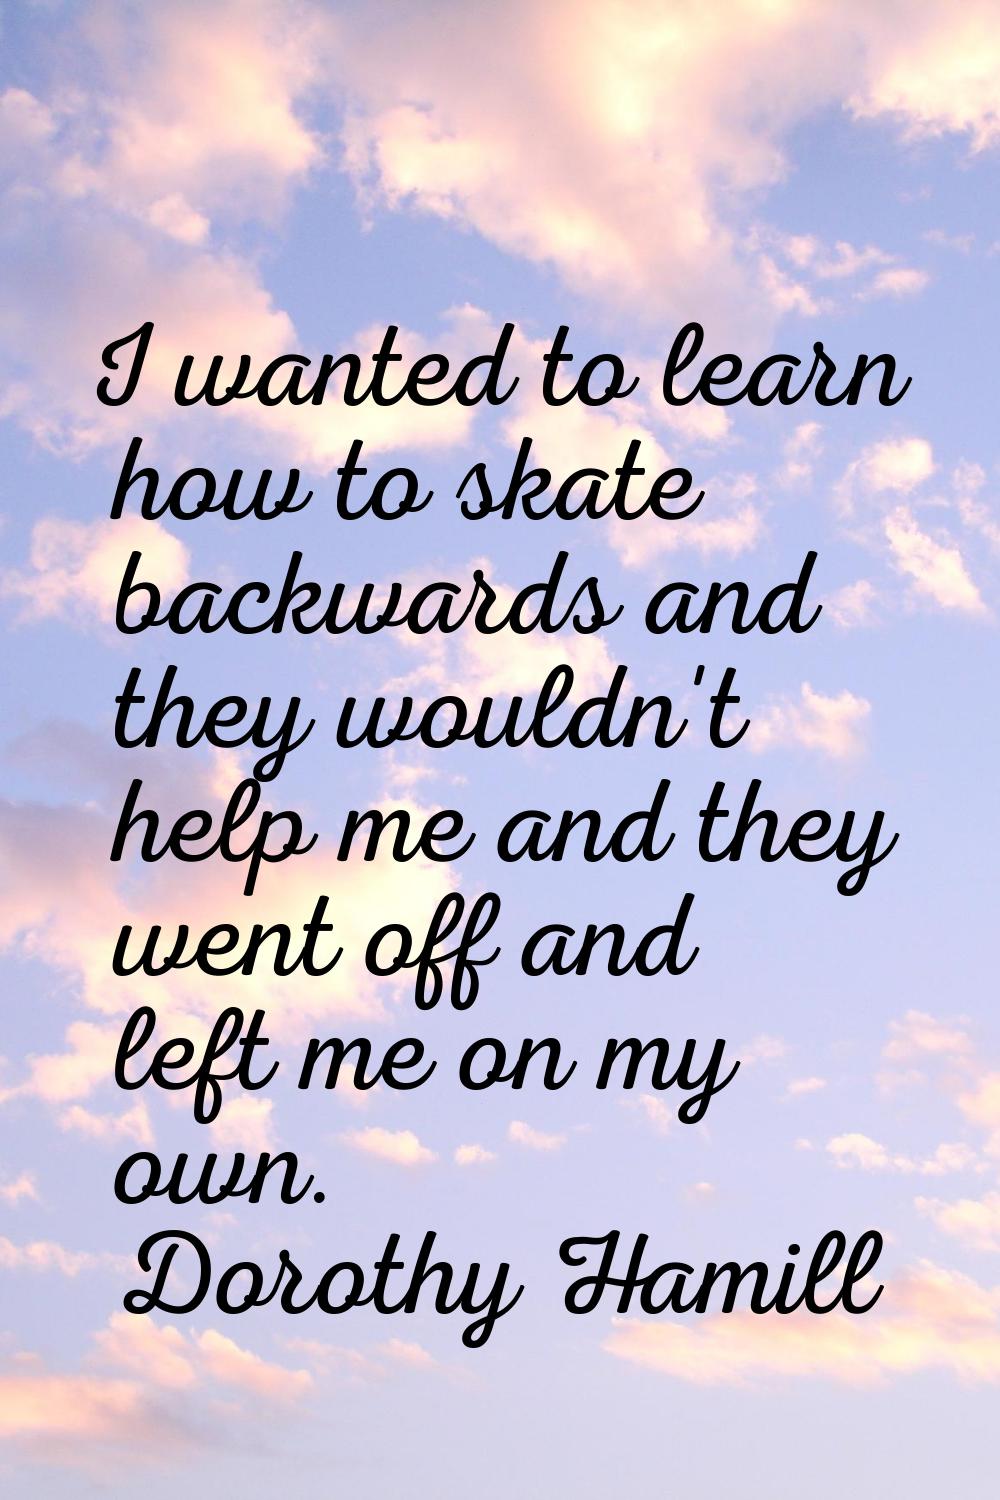 I wanted to learn how to skate backwards and they wouldn't help me and they went off and left me on